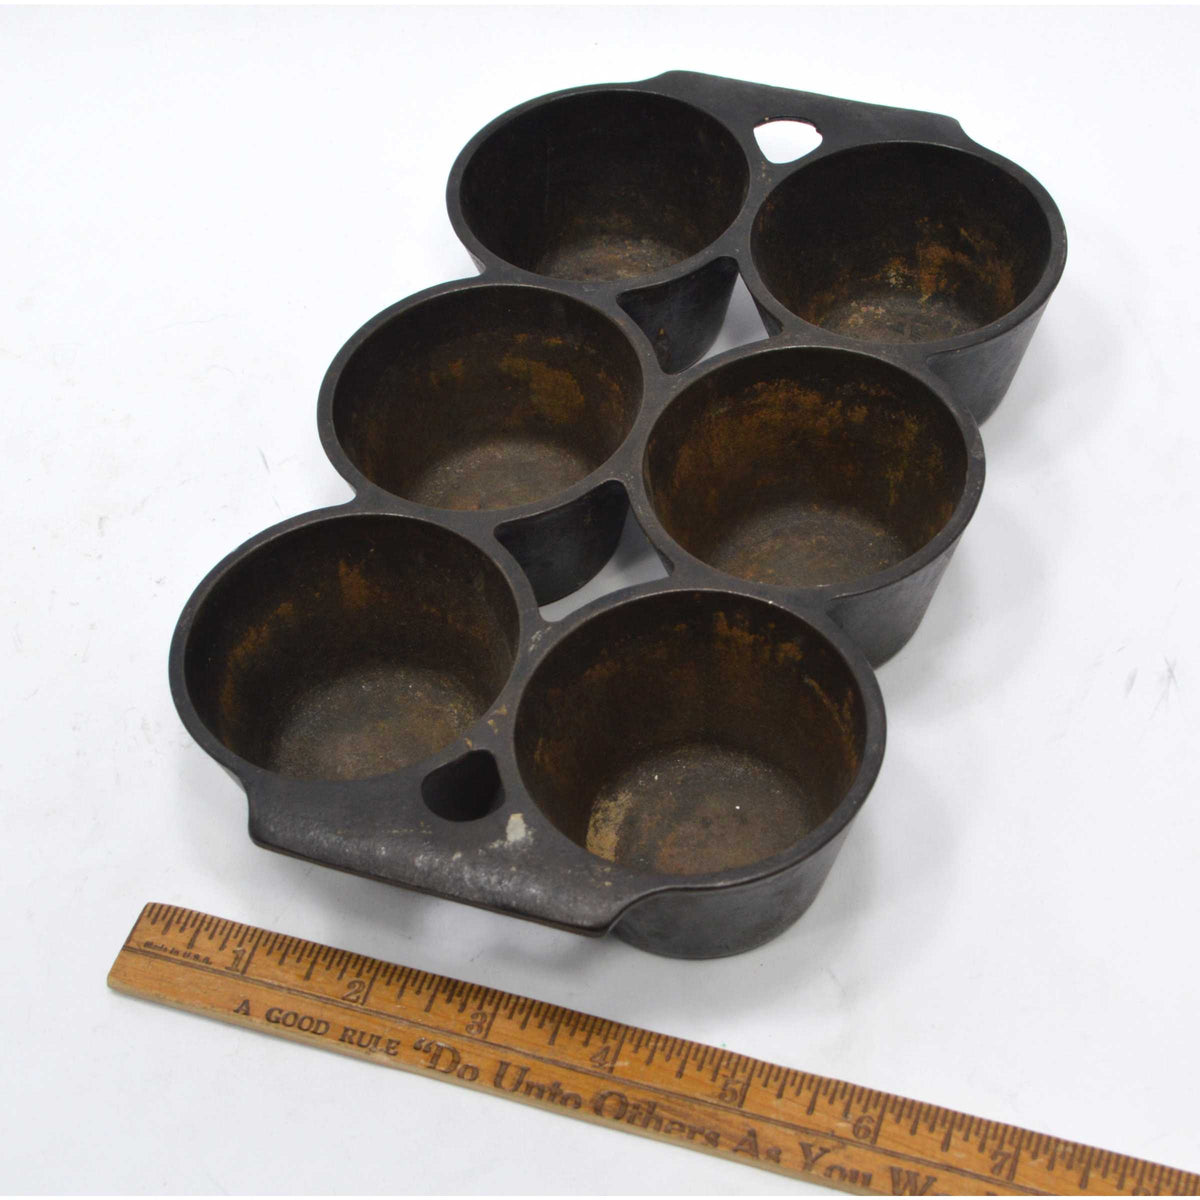 Antique CAST IRON MUFFIN PAN No. 18 6141 by GRISWOLD ERIE PA. 6